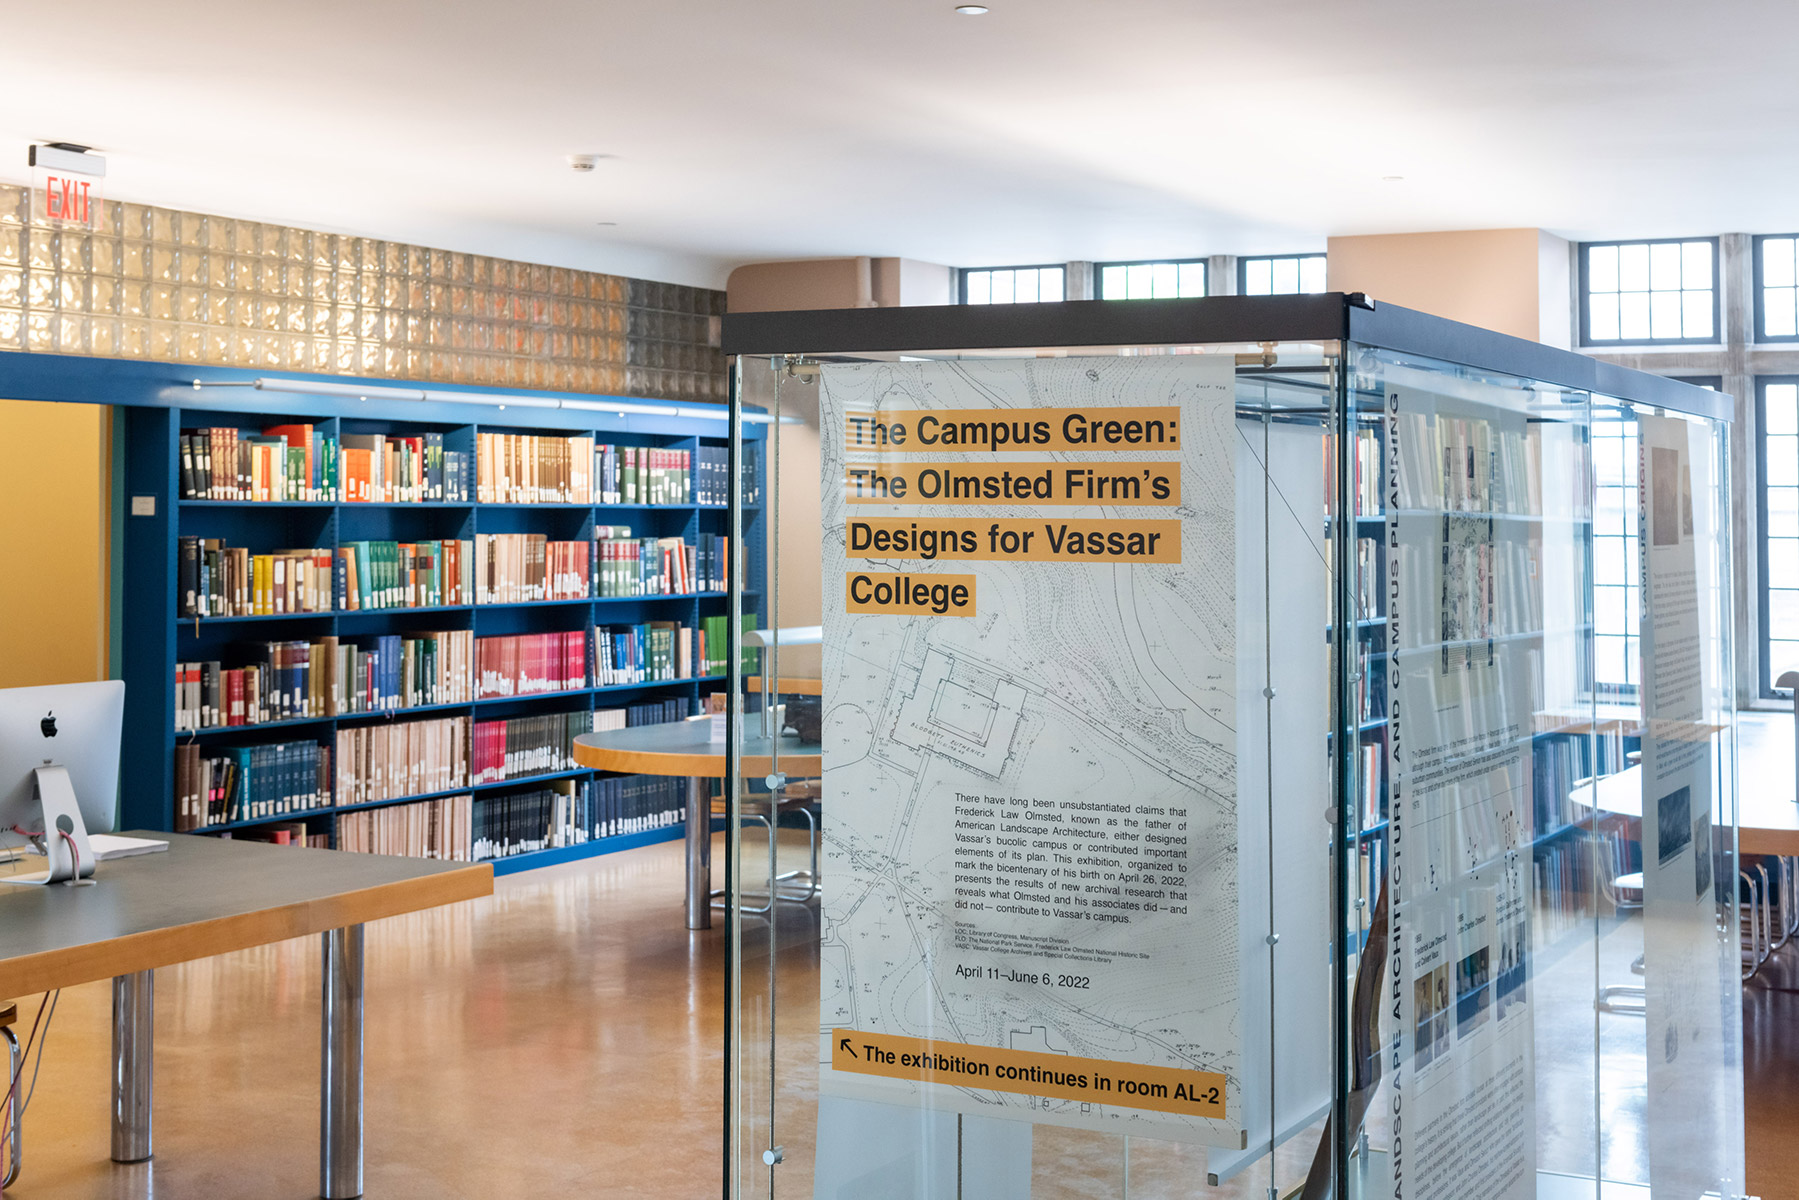 The exhibition, set in Vassar’s Art Library, is part of a series focusing on the history, preservation, and planning of the Vassar campus, organized by the Vassar Art Department.  